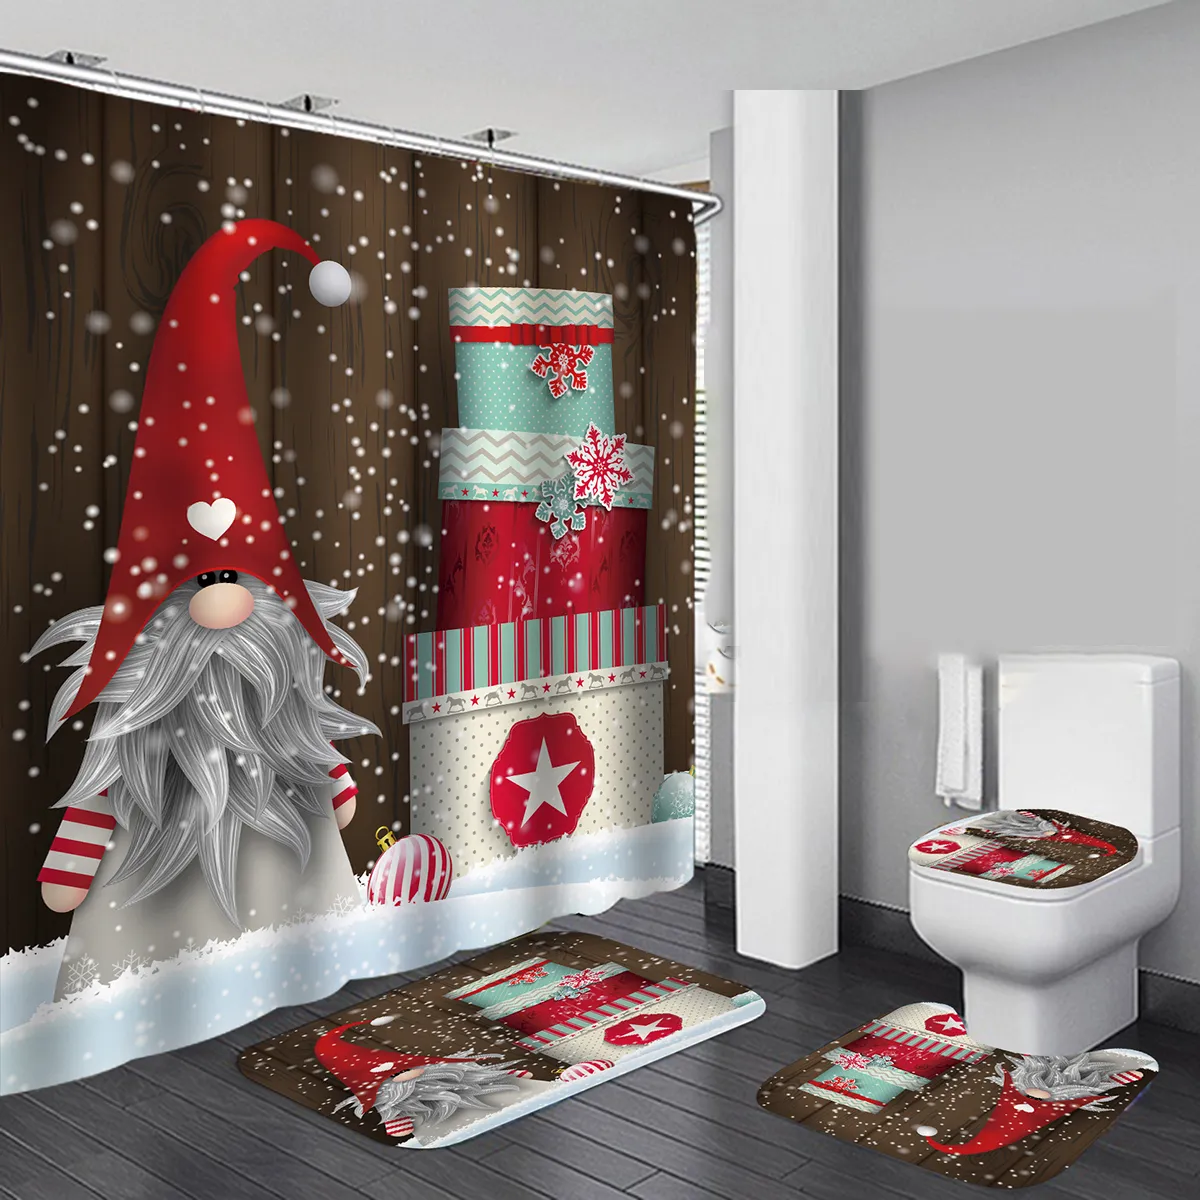 Merry Christmas Waterproof Bath Shower Curtain Christmas Santa Claus Bath Mat Lid Toilet Cover Polyester/ Flannel Shower Curtain T200102